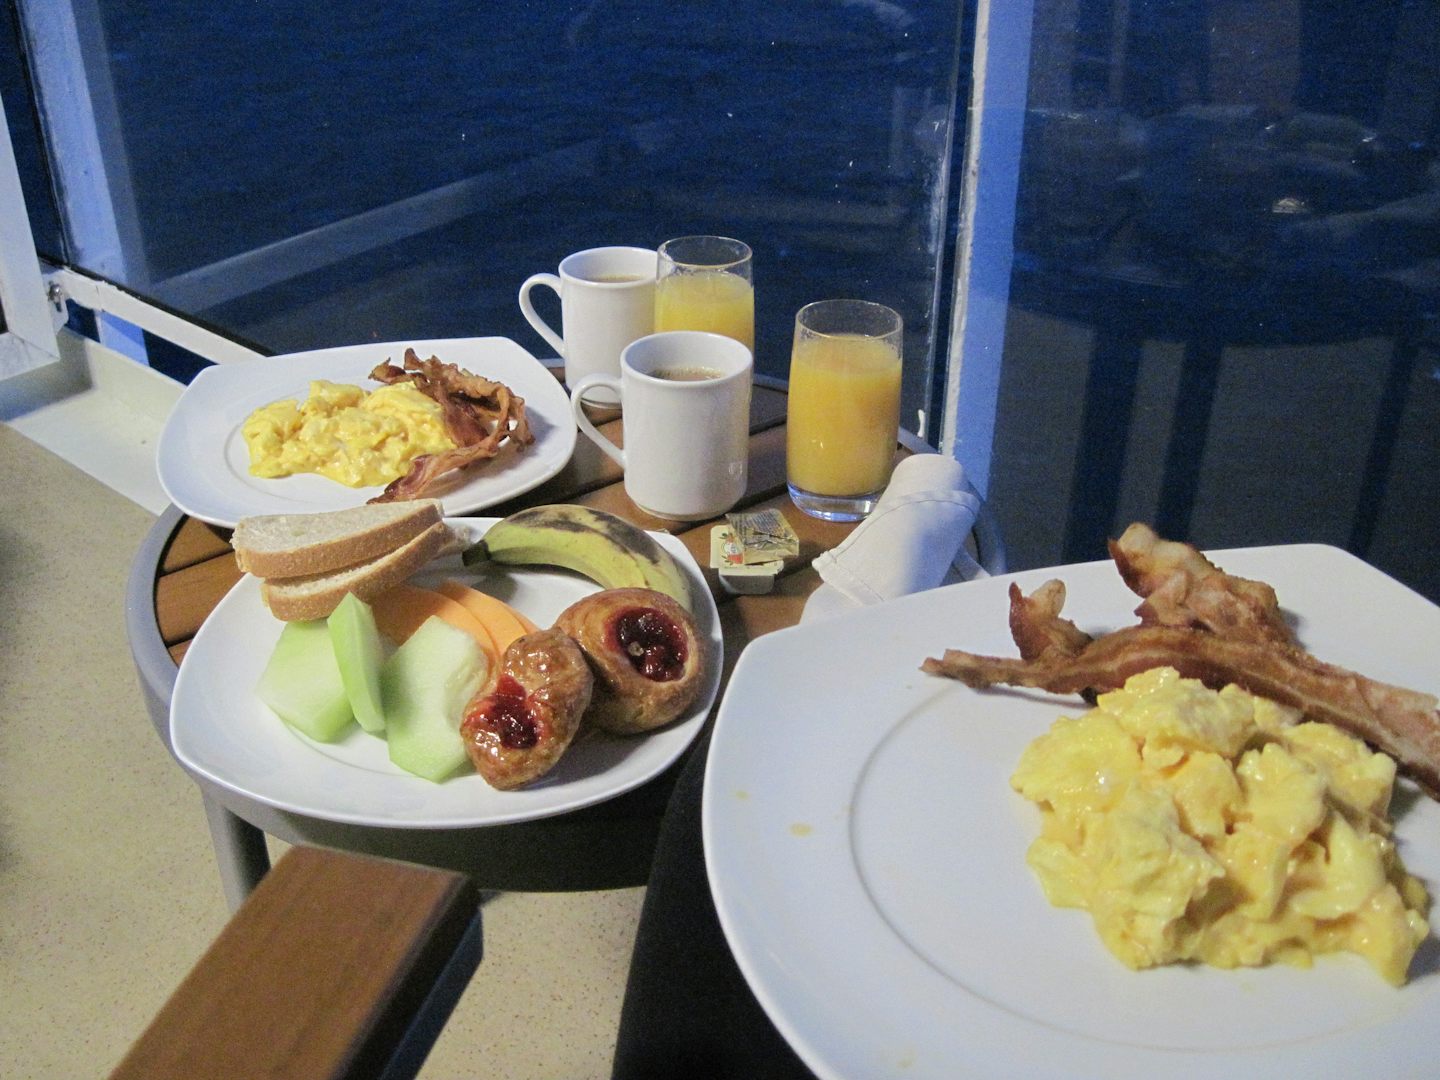 Breakfast delivered to our room balcony.